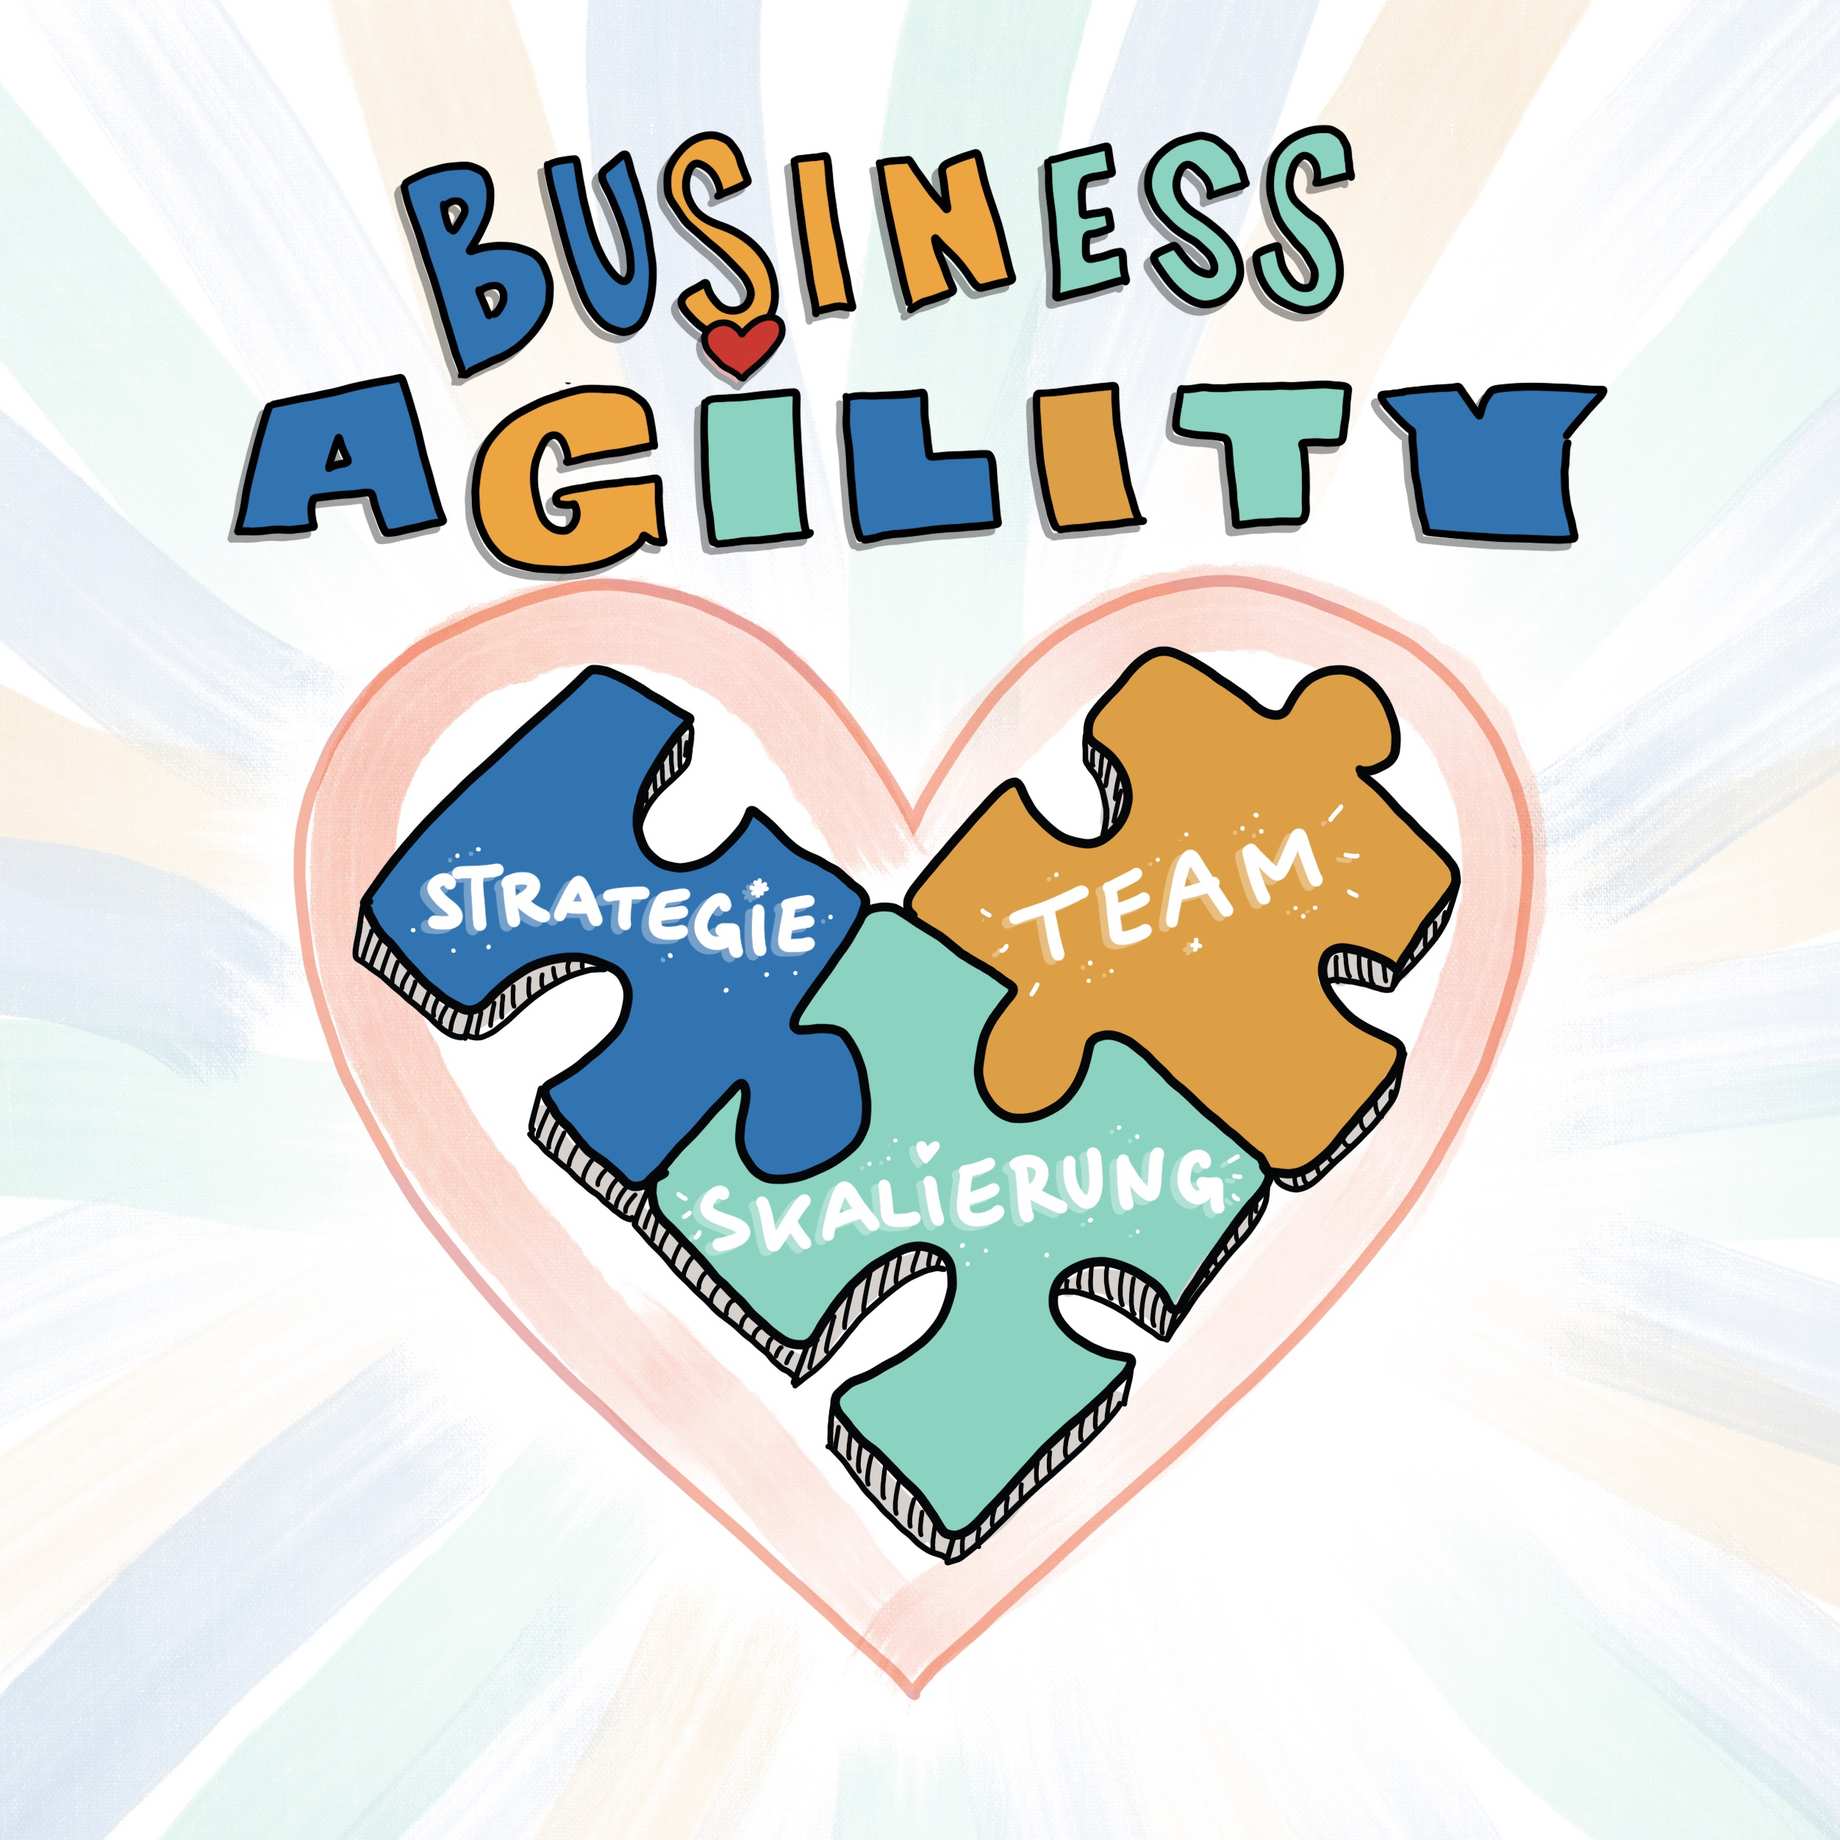 It is a square sketch, in the center of which there is a heart, from which pastel colored rays go in all directions. - Above the heart in colorful painted letters it says: Business Agility. - The inside of the heart consists of 3 differently colored puzzle pieces that interlock. From top left to top right, these are: "Strategy", "Scaling" and "Team".